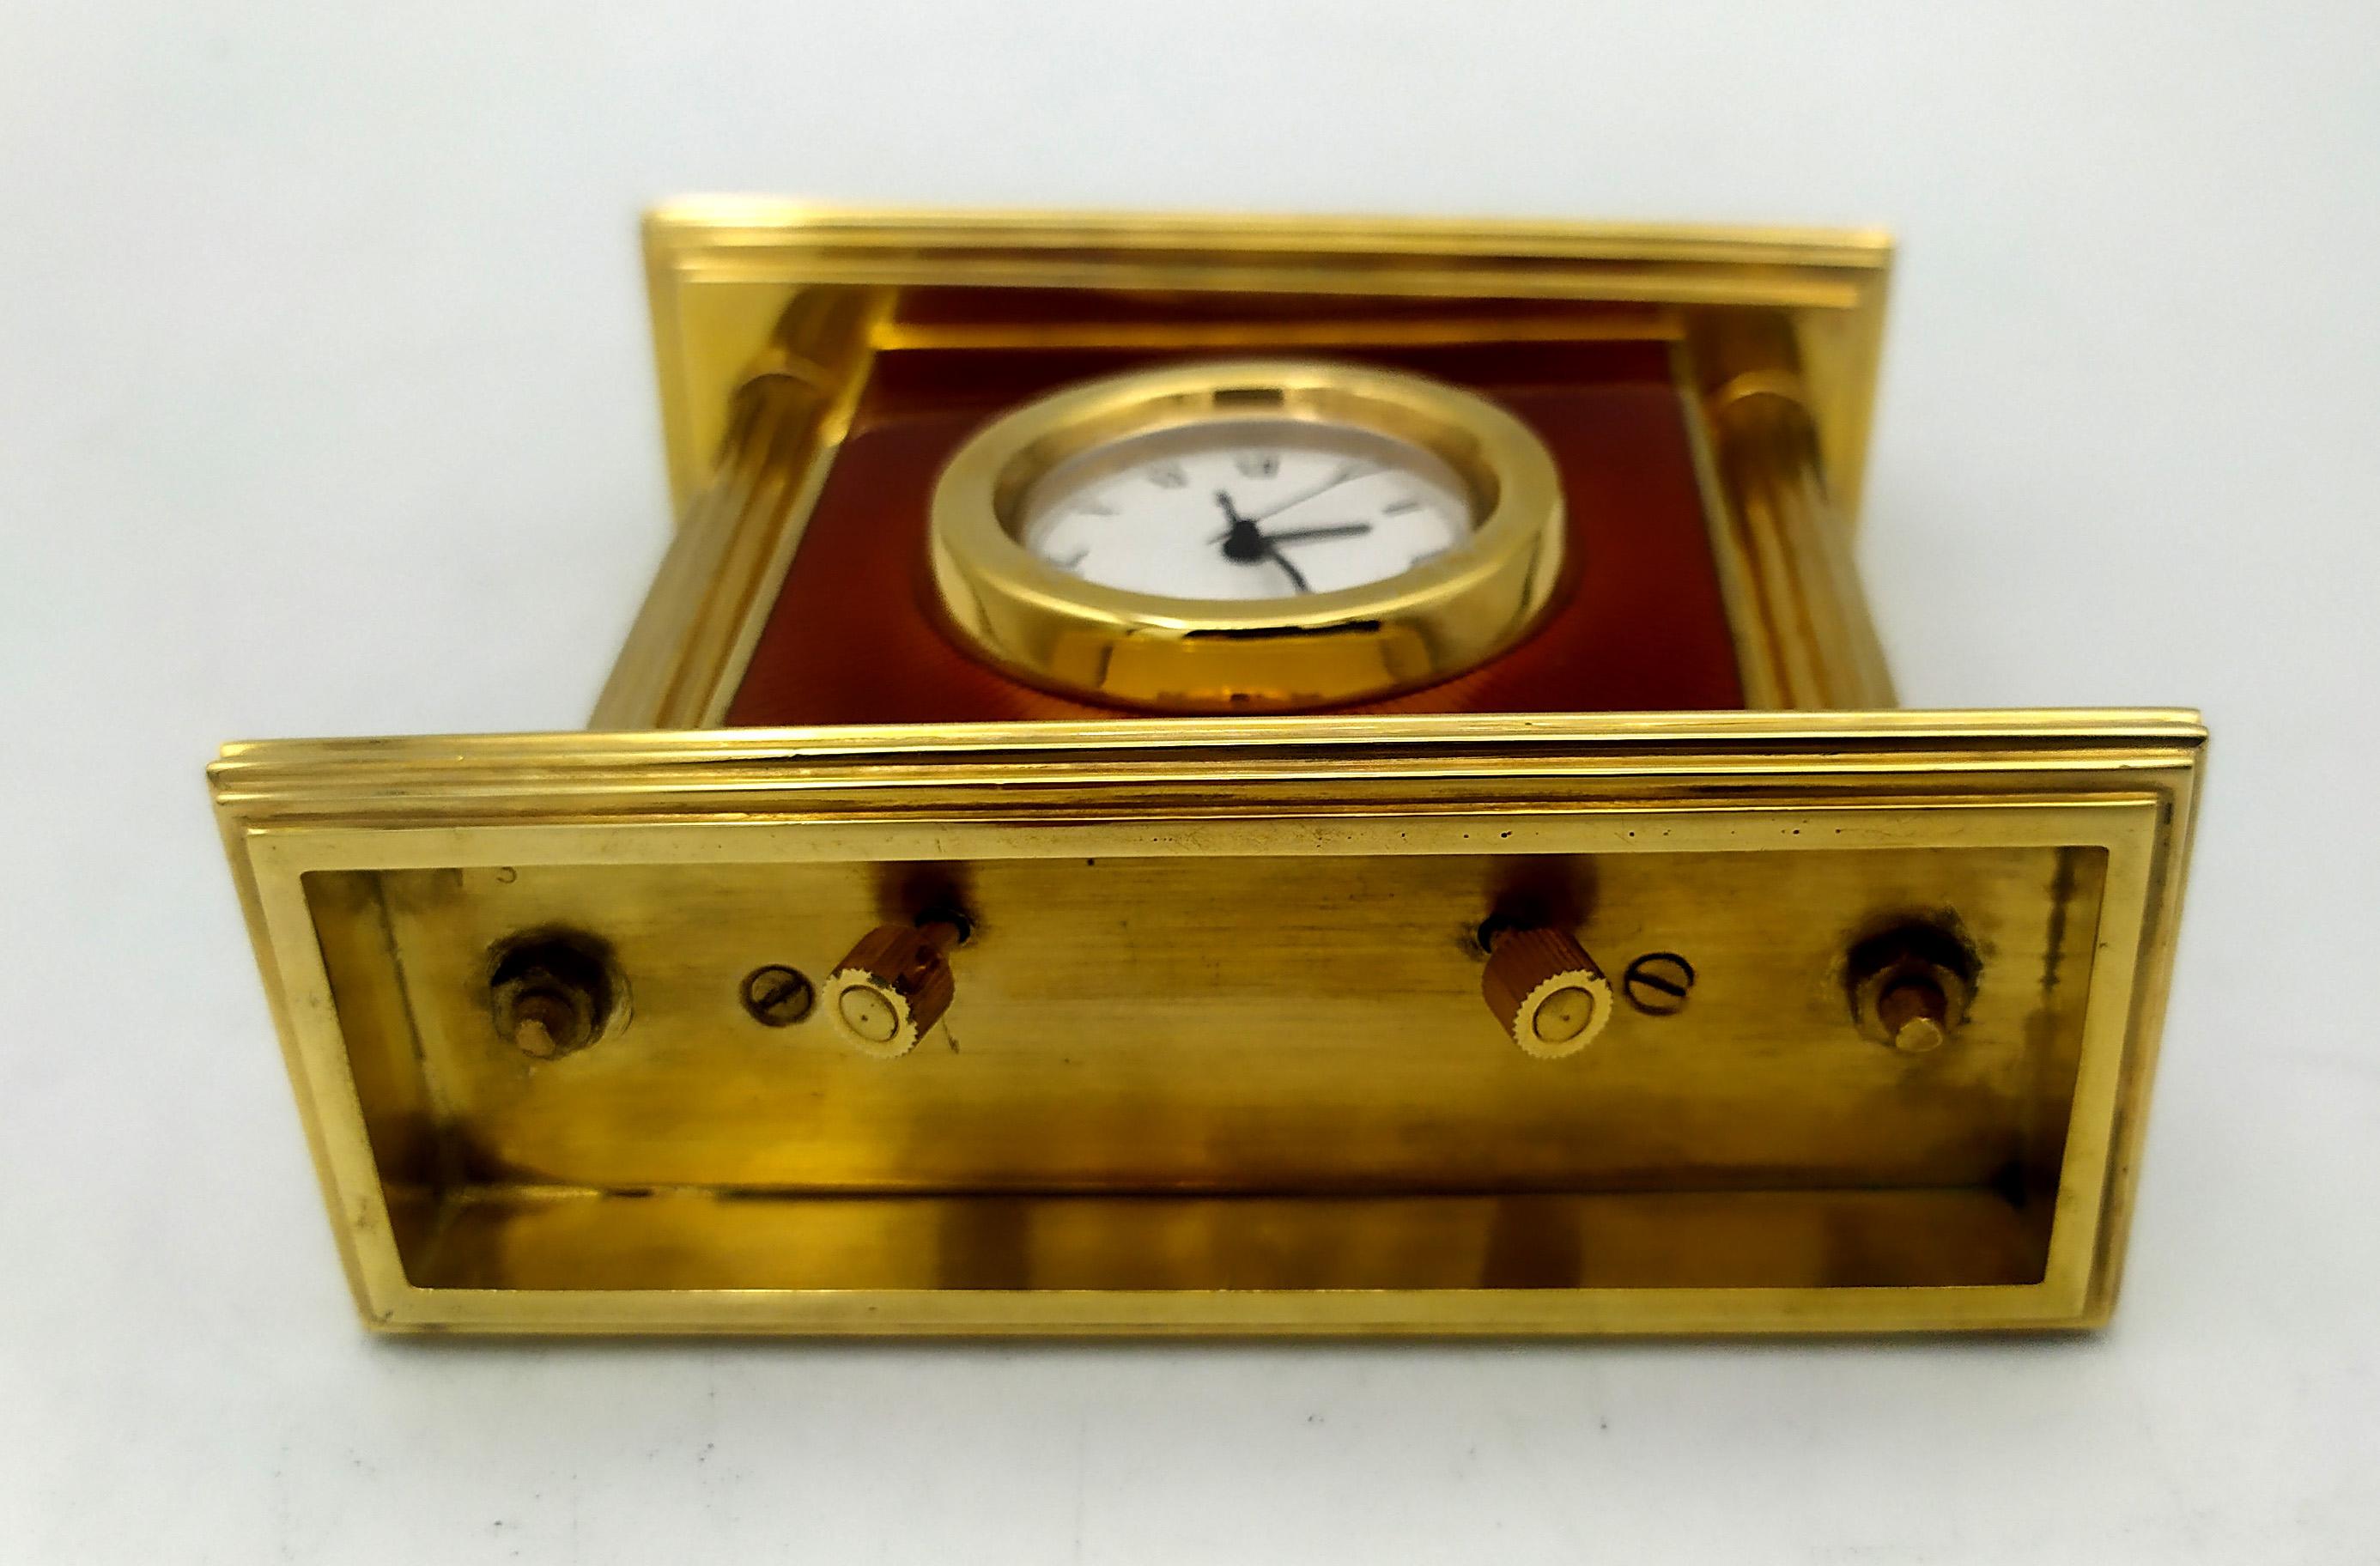 Neoclassical Revival Clock Red fired enamel on guillochè, with columns in Neoclassico Salimbeni For Sale